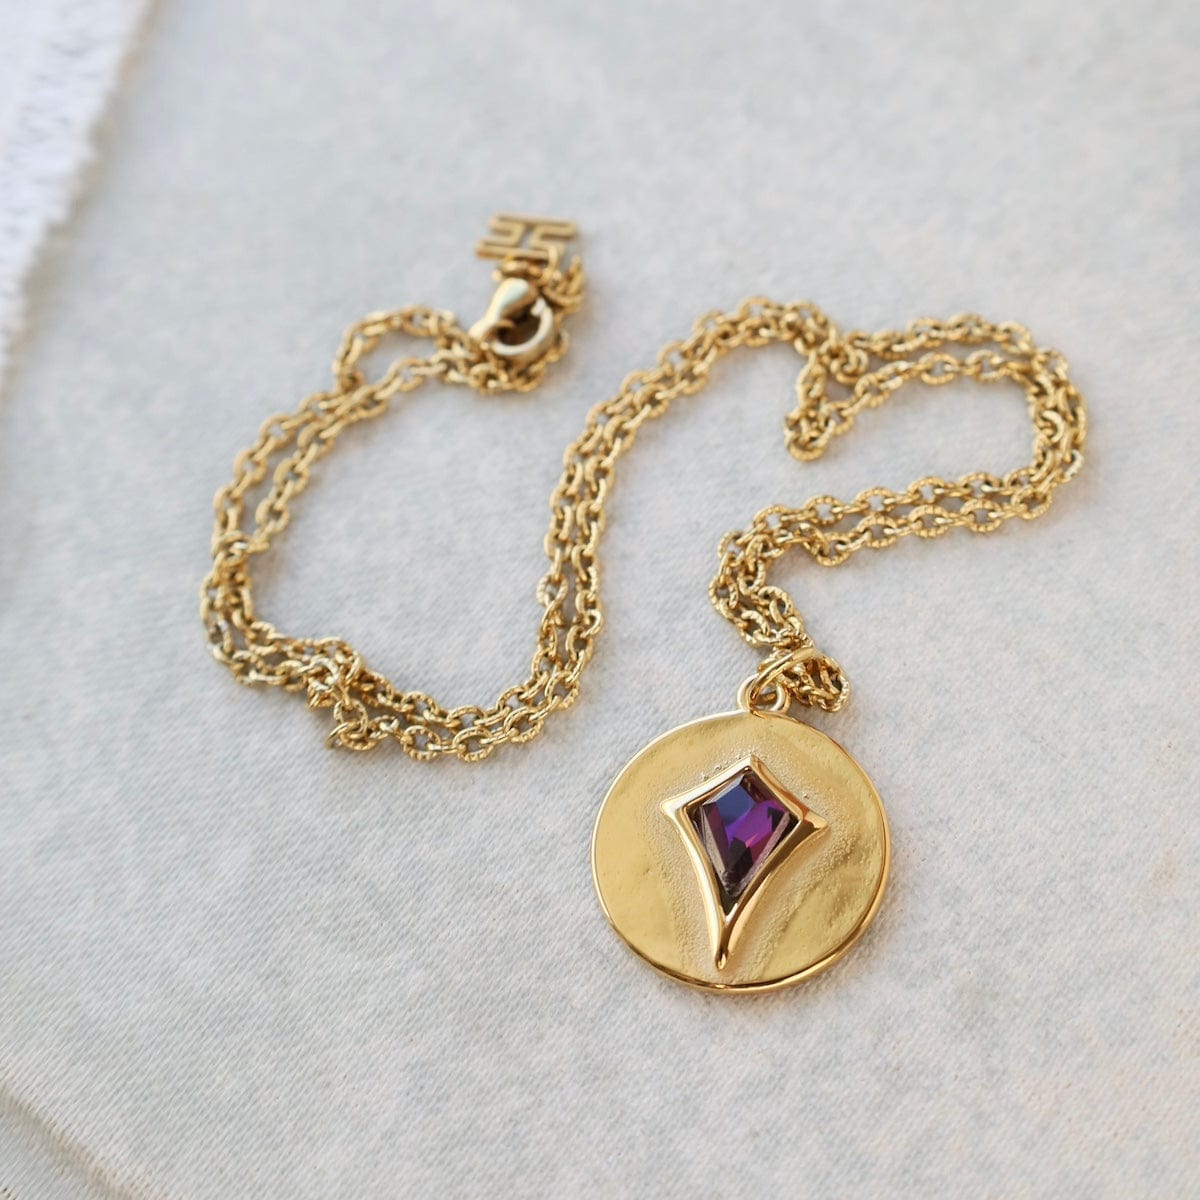 NKL-GPL Carmen// The  necklace - 18k gold plated stainless